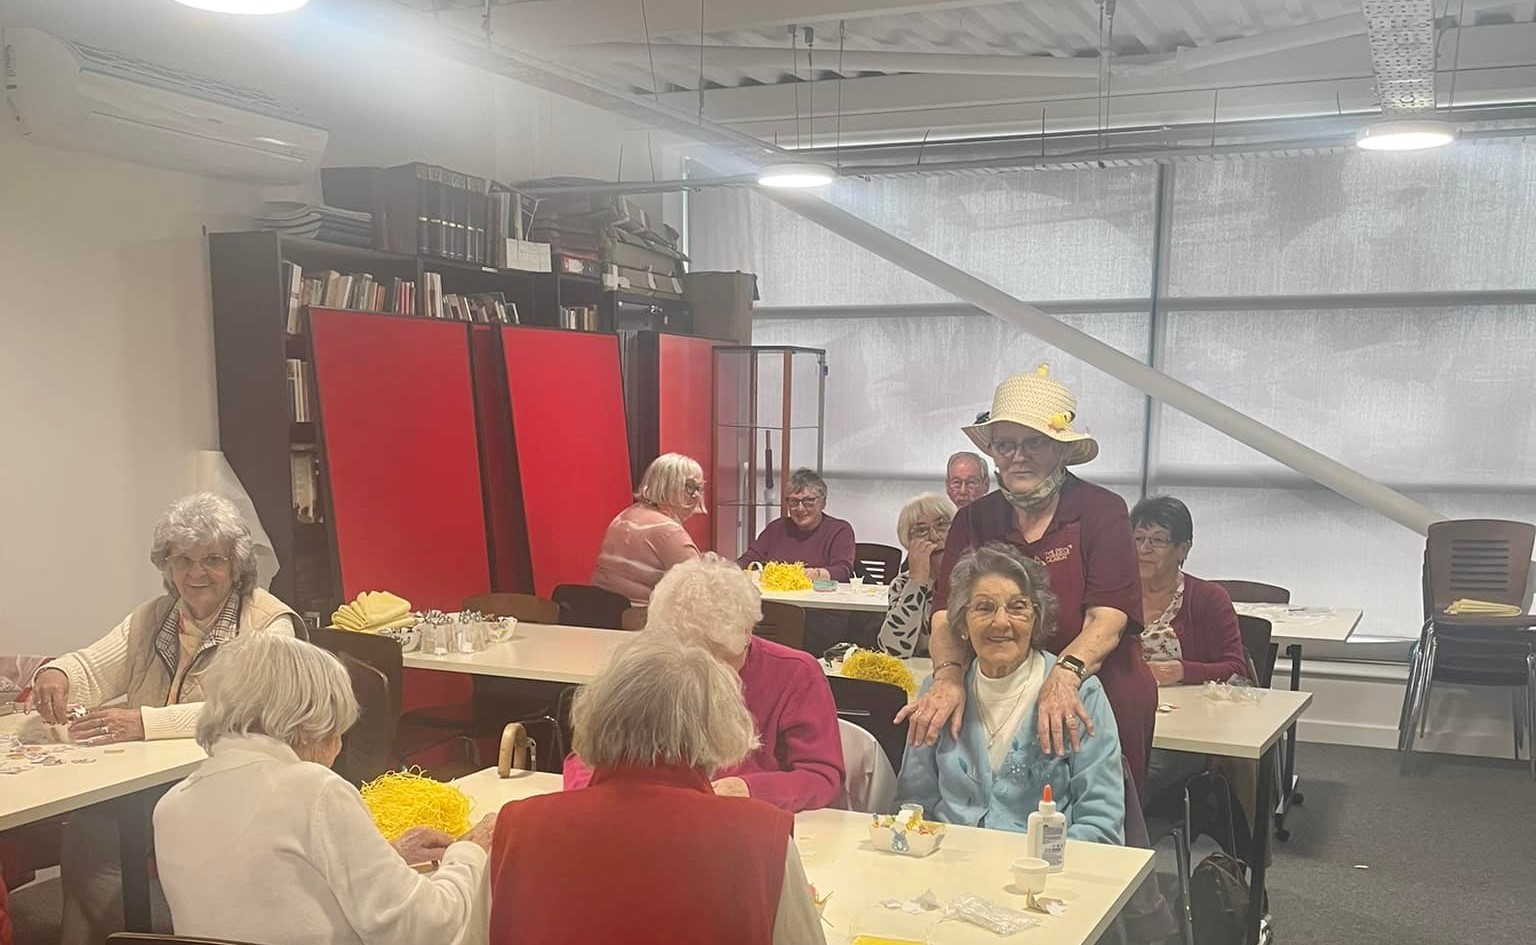 Some of the Devil's Porridge Museum's Cordite Club sat at tables with a Easter basket craft.